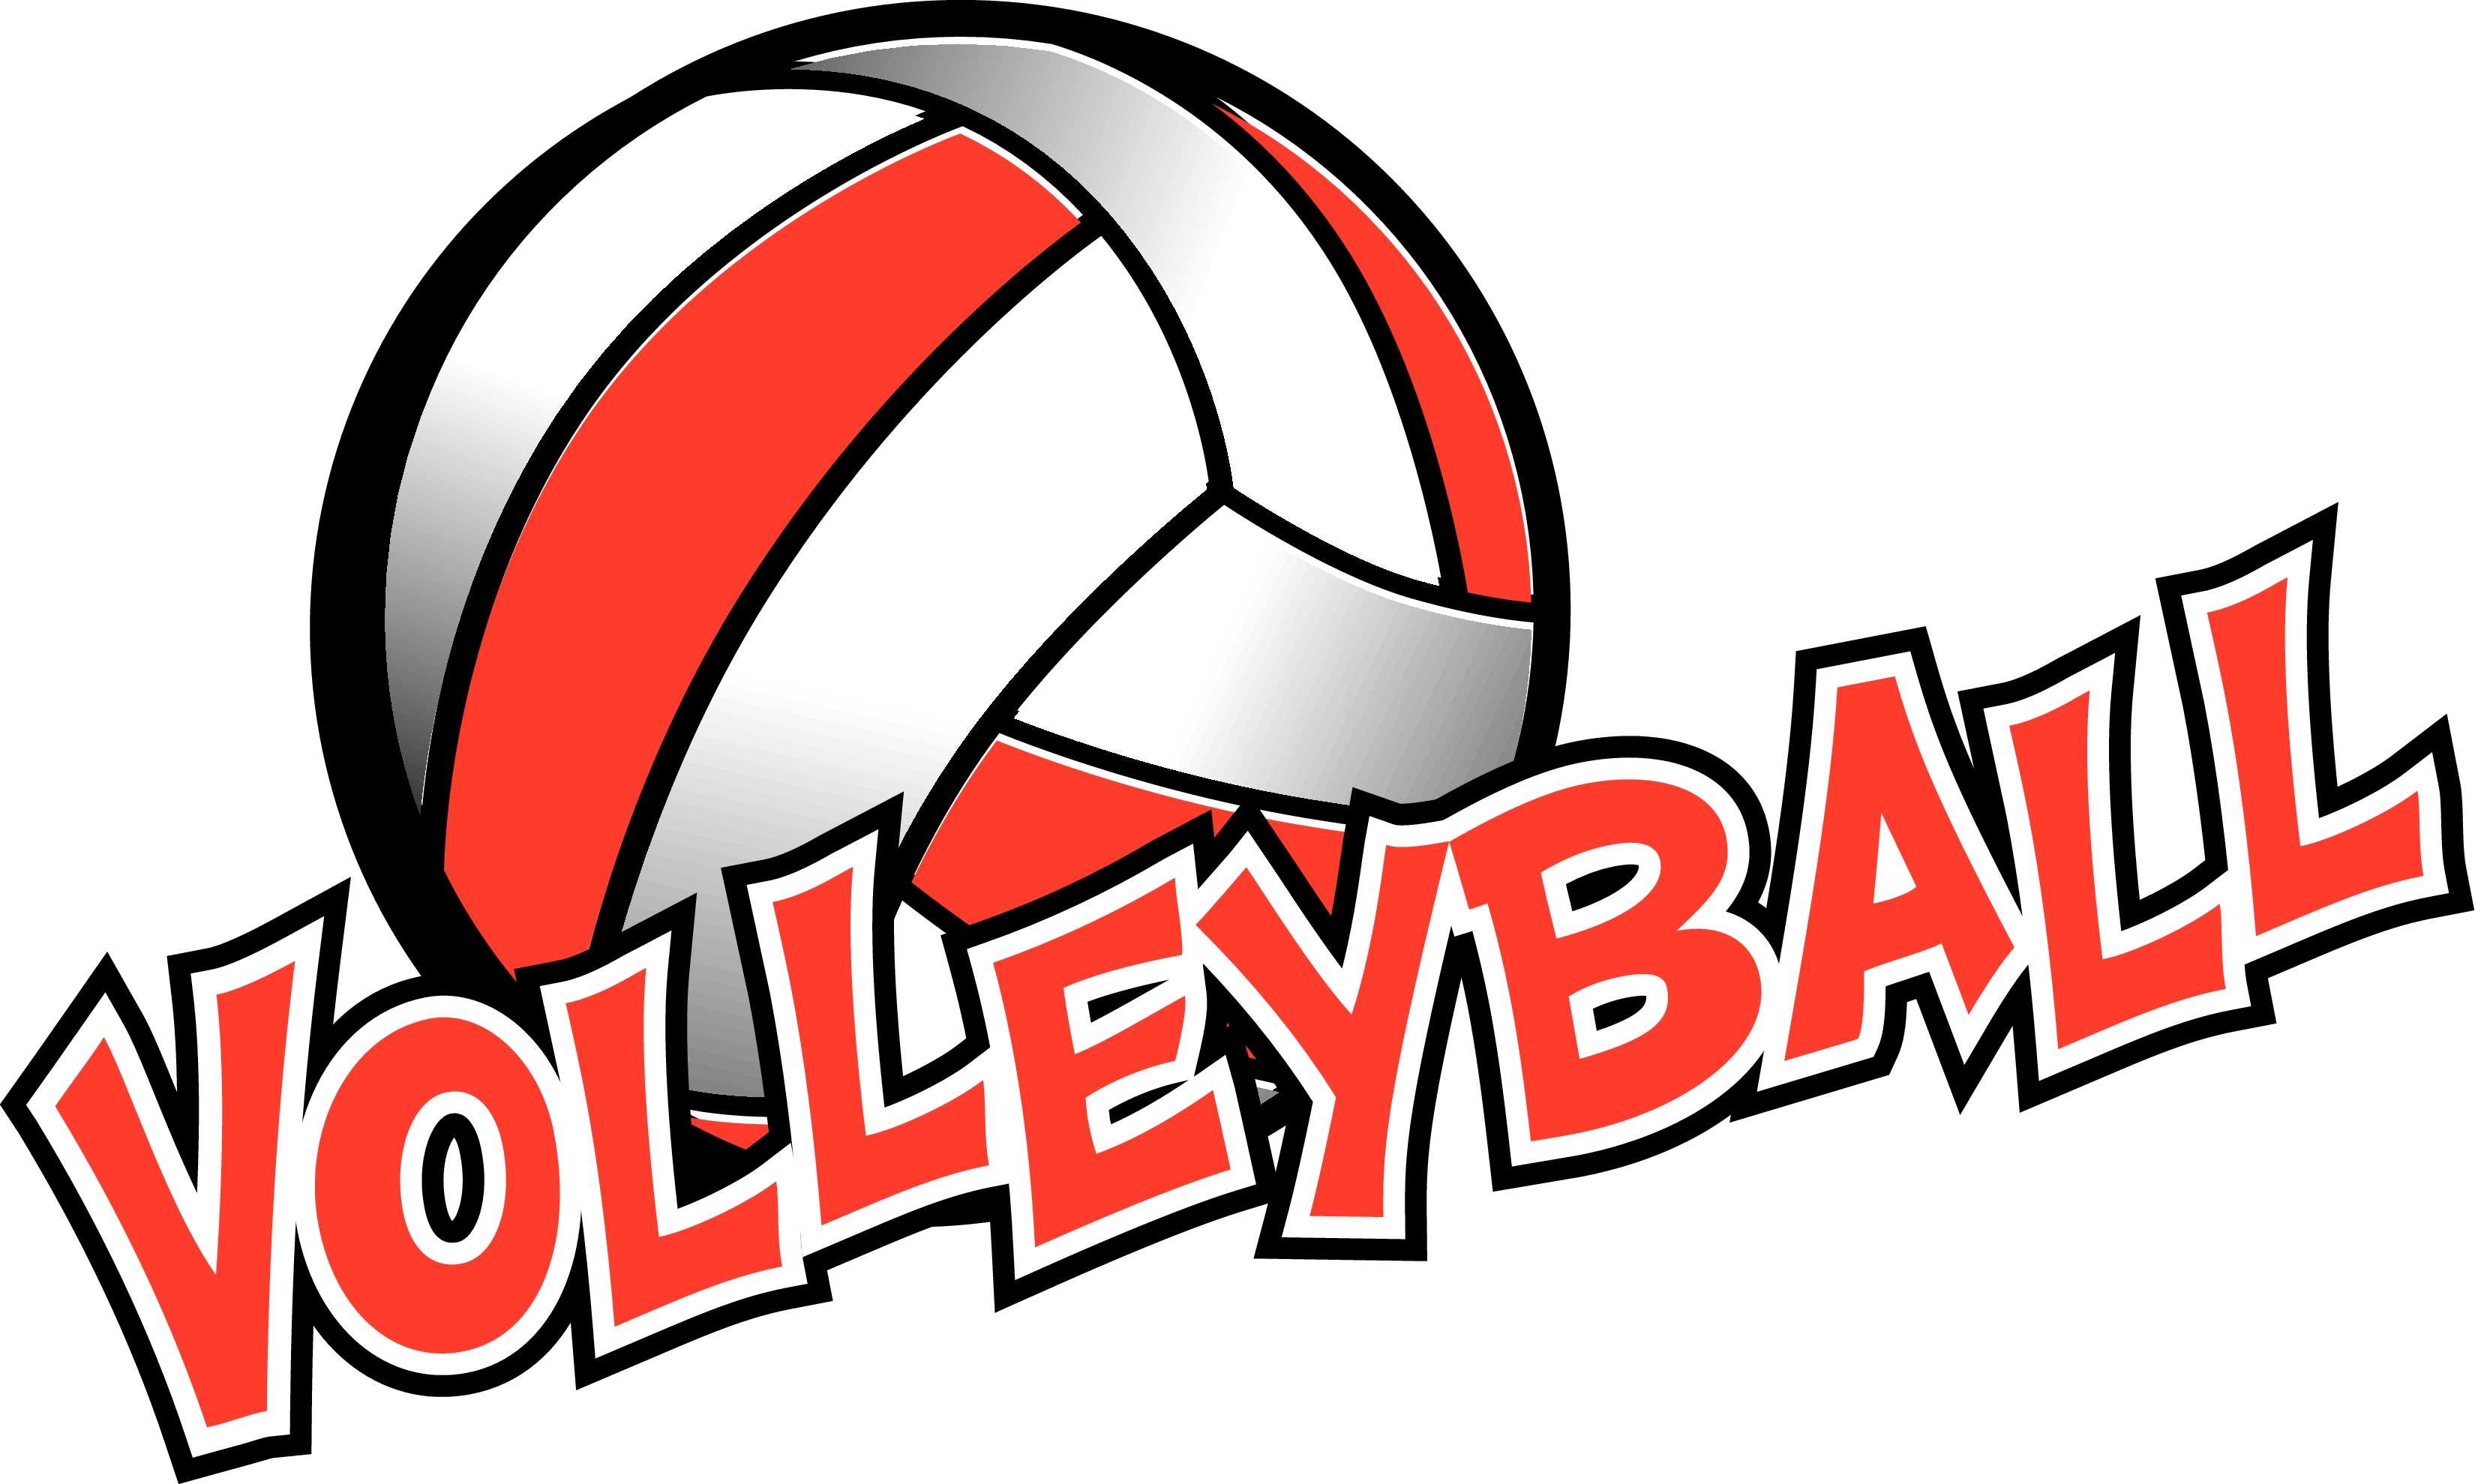 Love Volleyball Word Clipart 